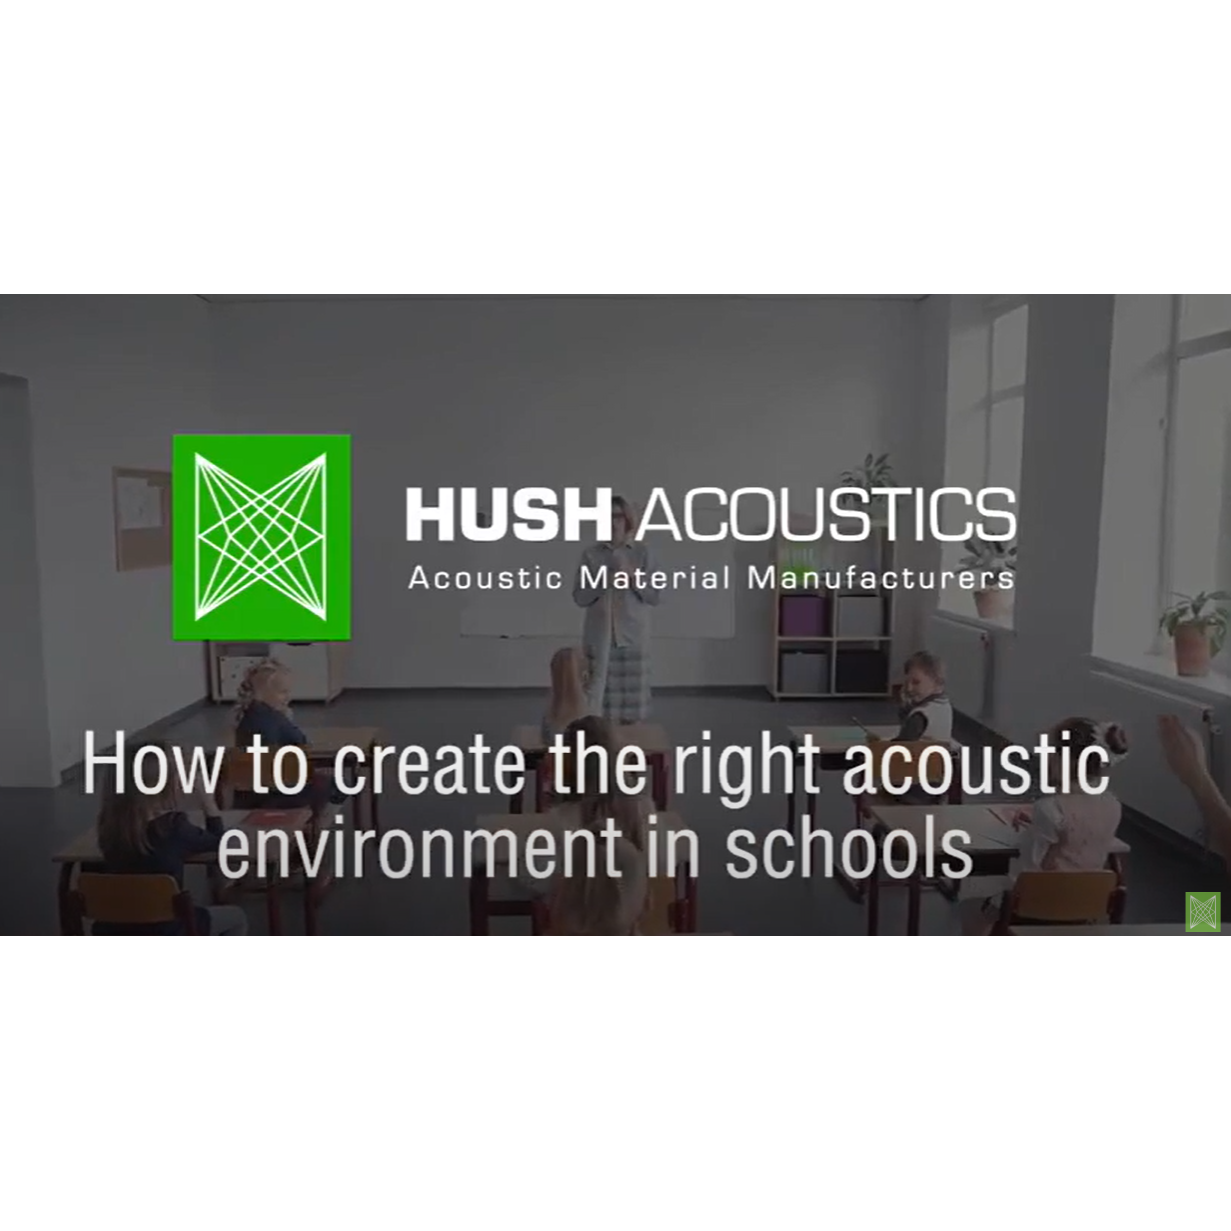 How to create the right acoustic environment in schools